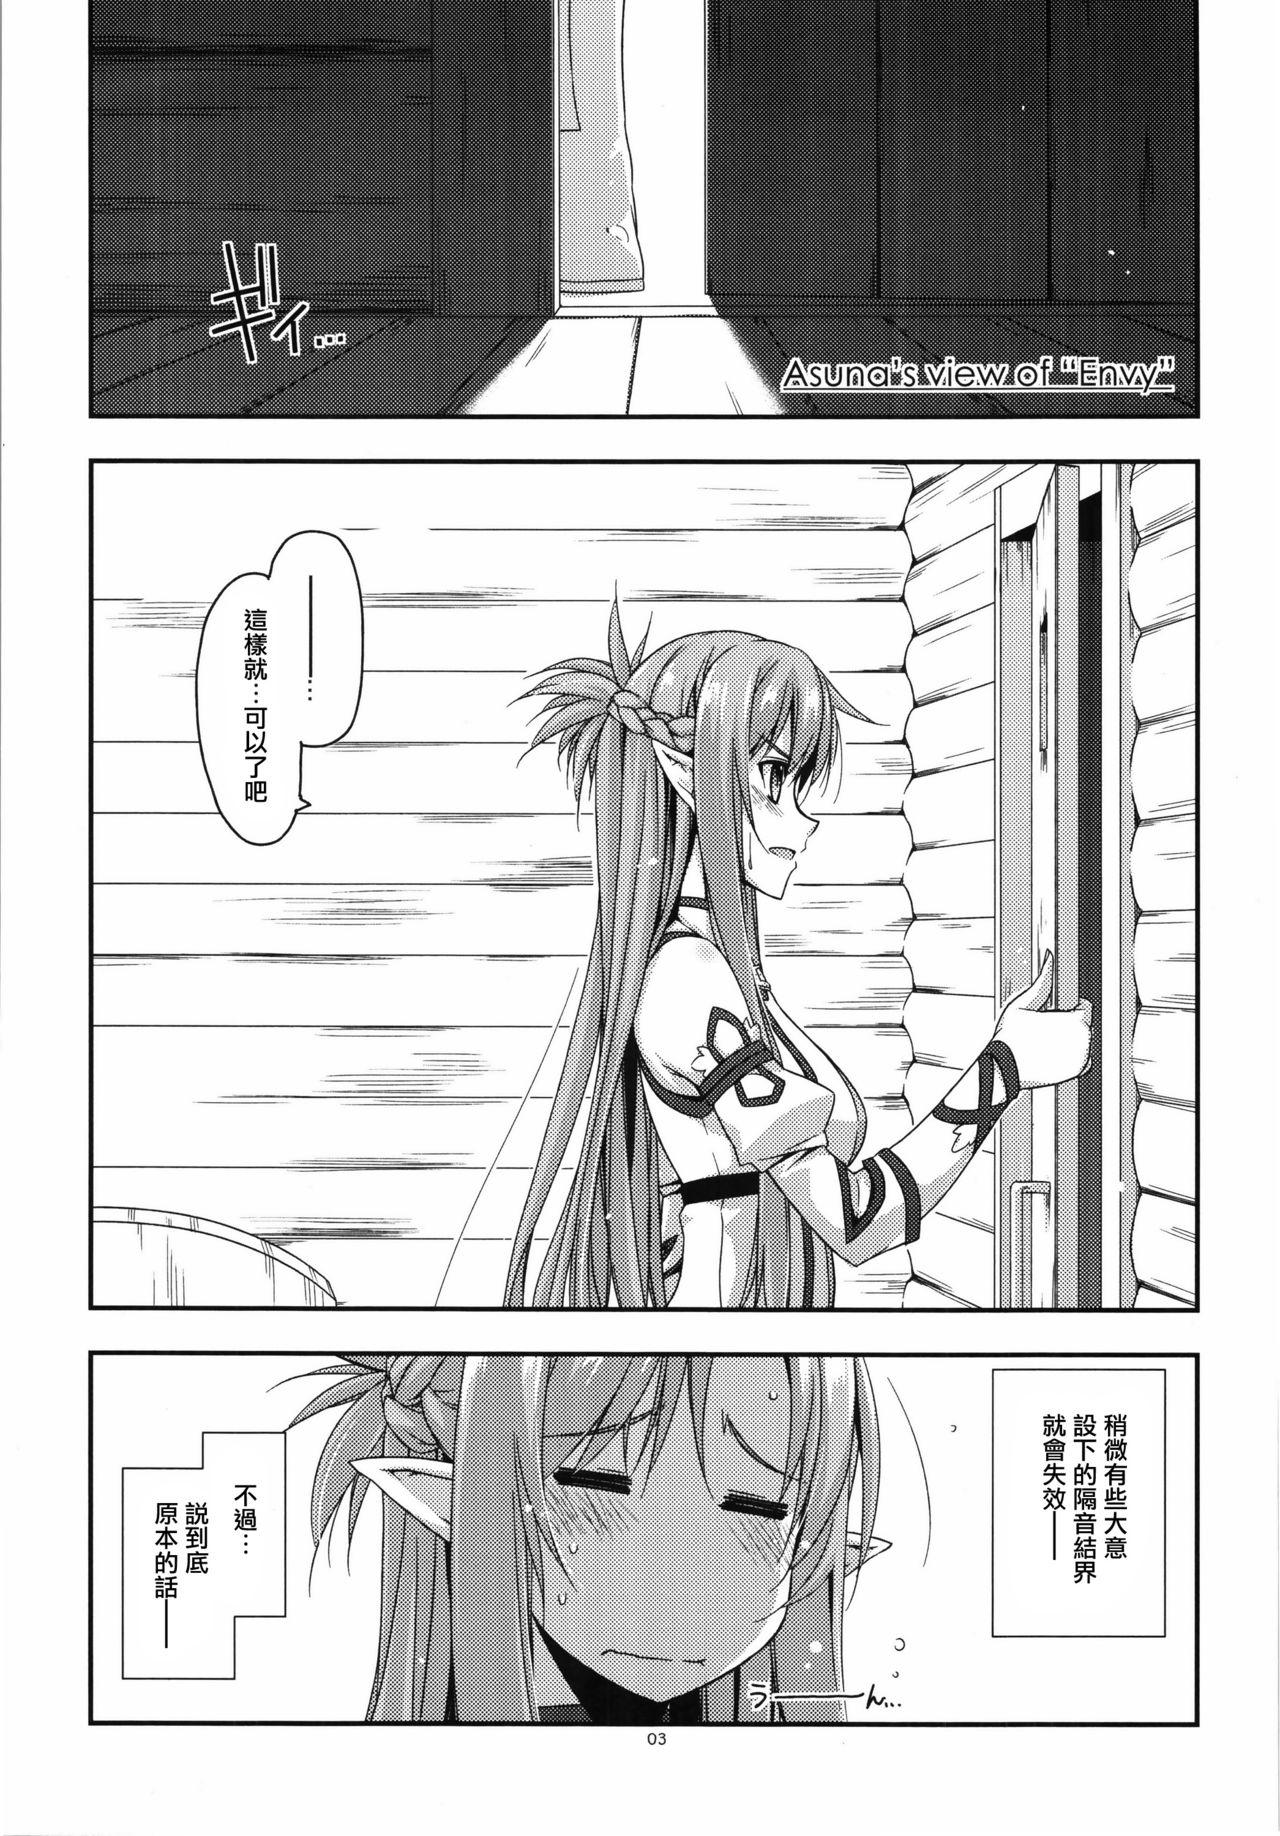 Farting Extra38 - Sword art online Hogtied - Page 3